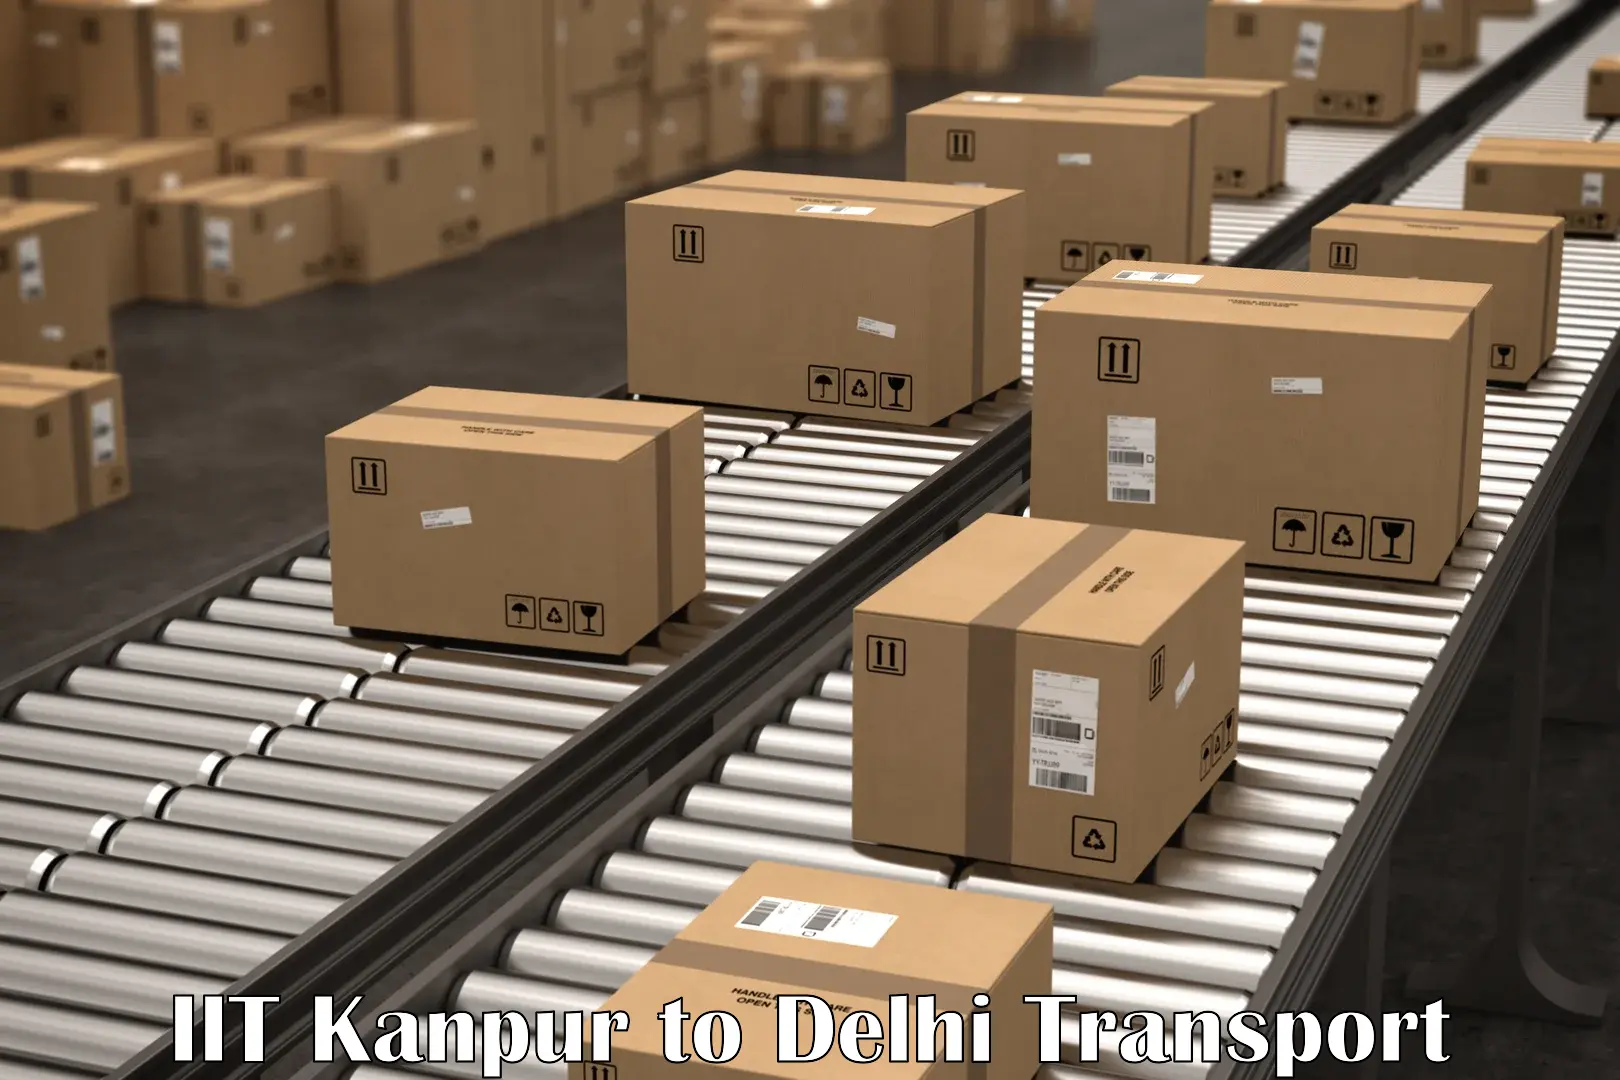 Daily parcel service transport IIT Kanpur to University of Delhi